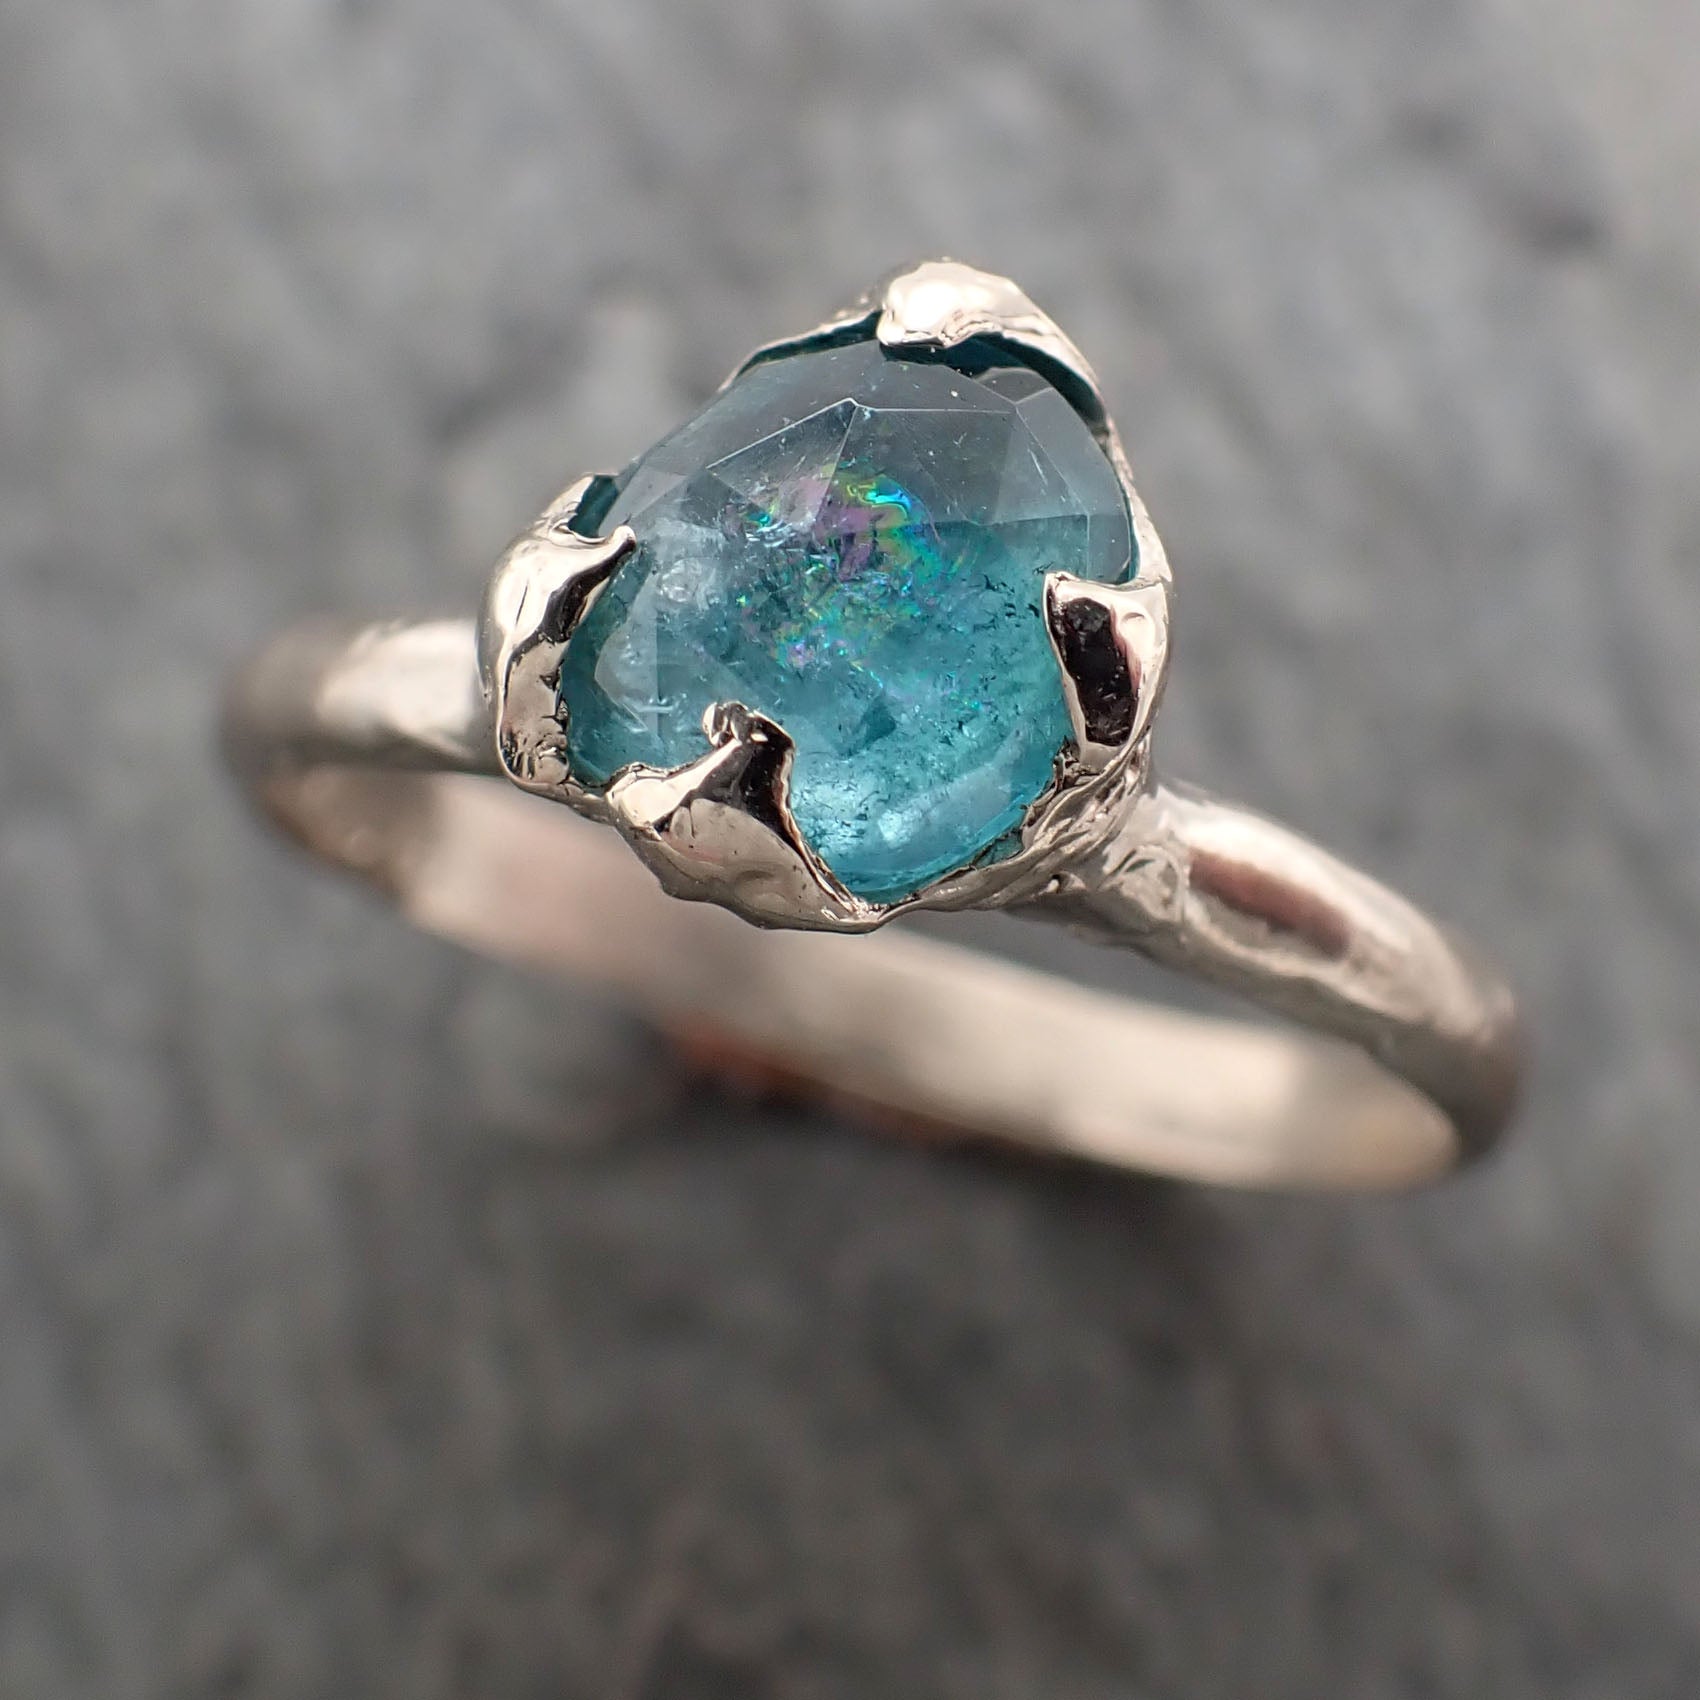 fancy cut blue tourmaline white gold ring gemstone solitaire recycled 14k statement 2332 Alternative Engagement